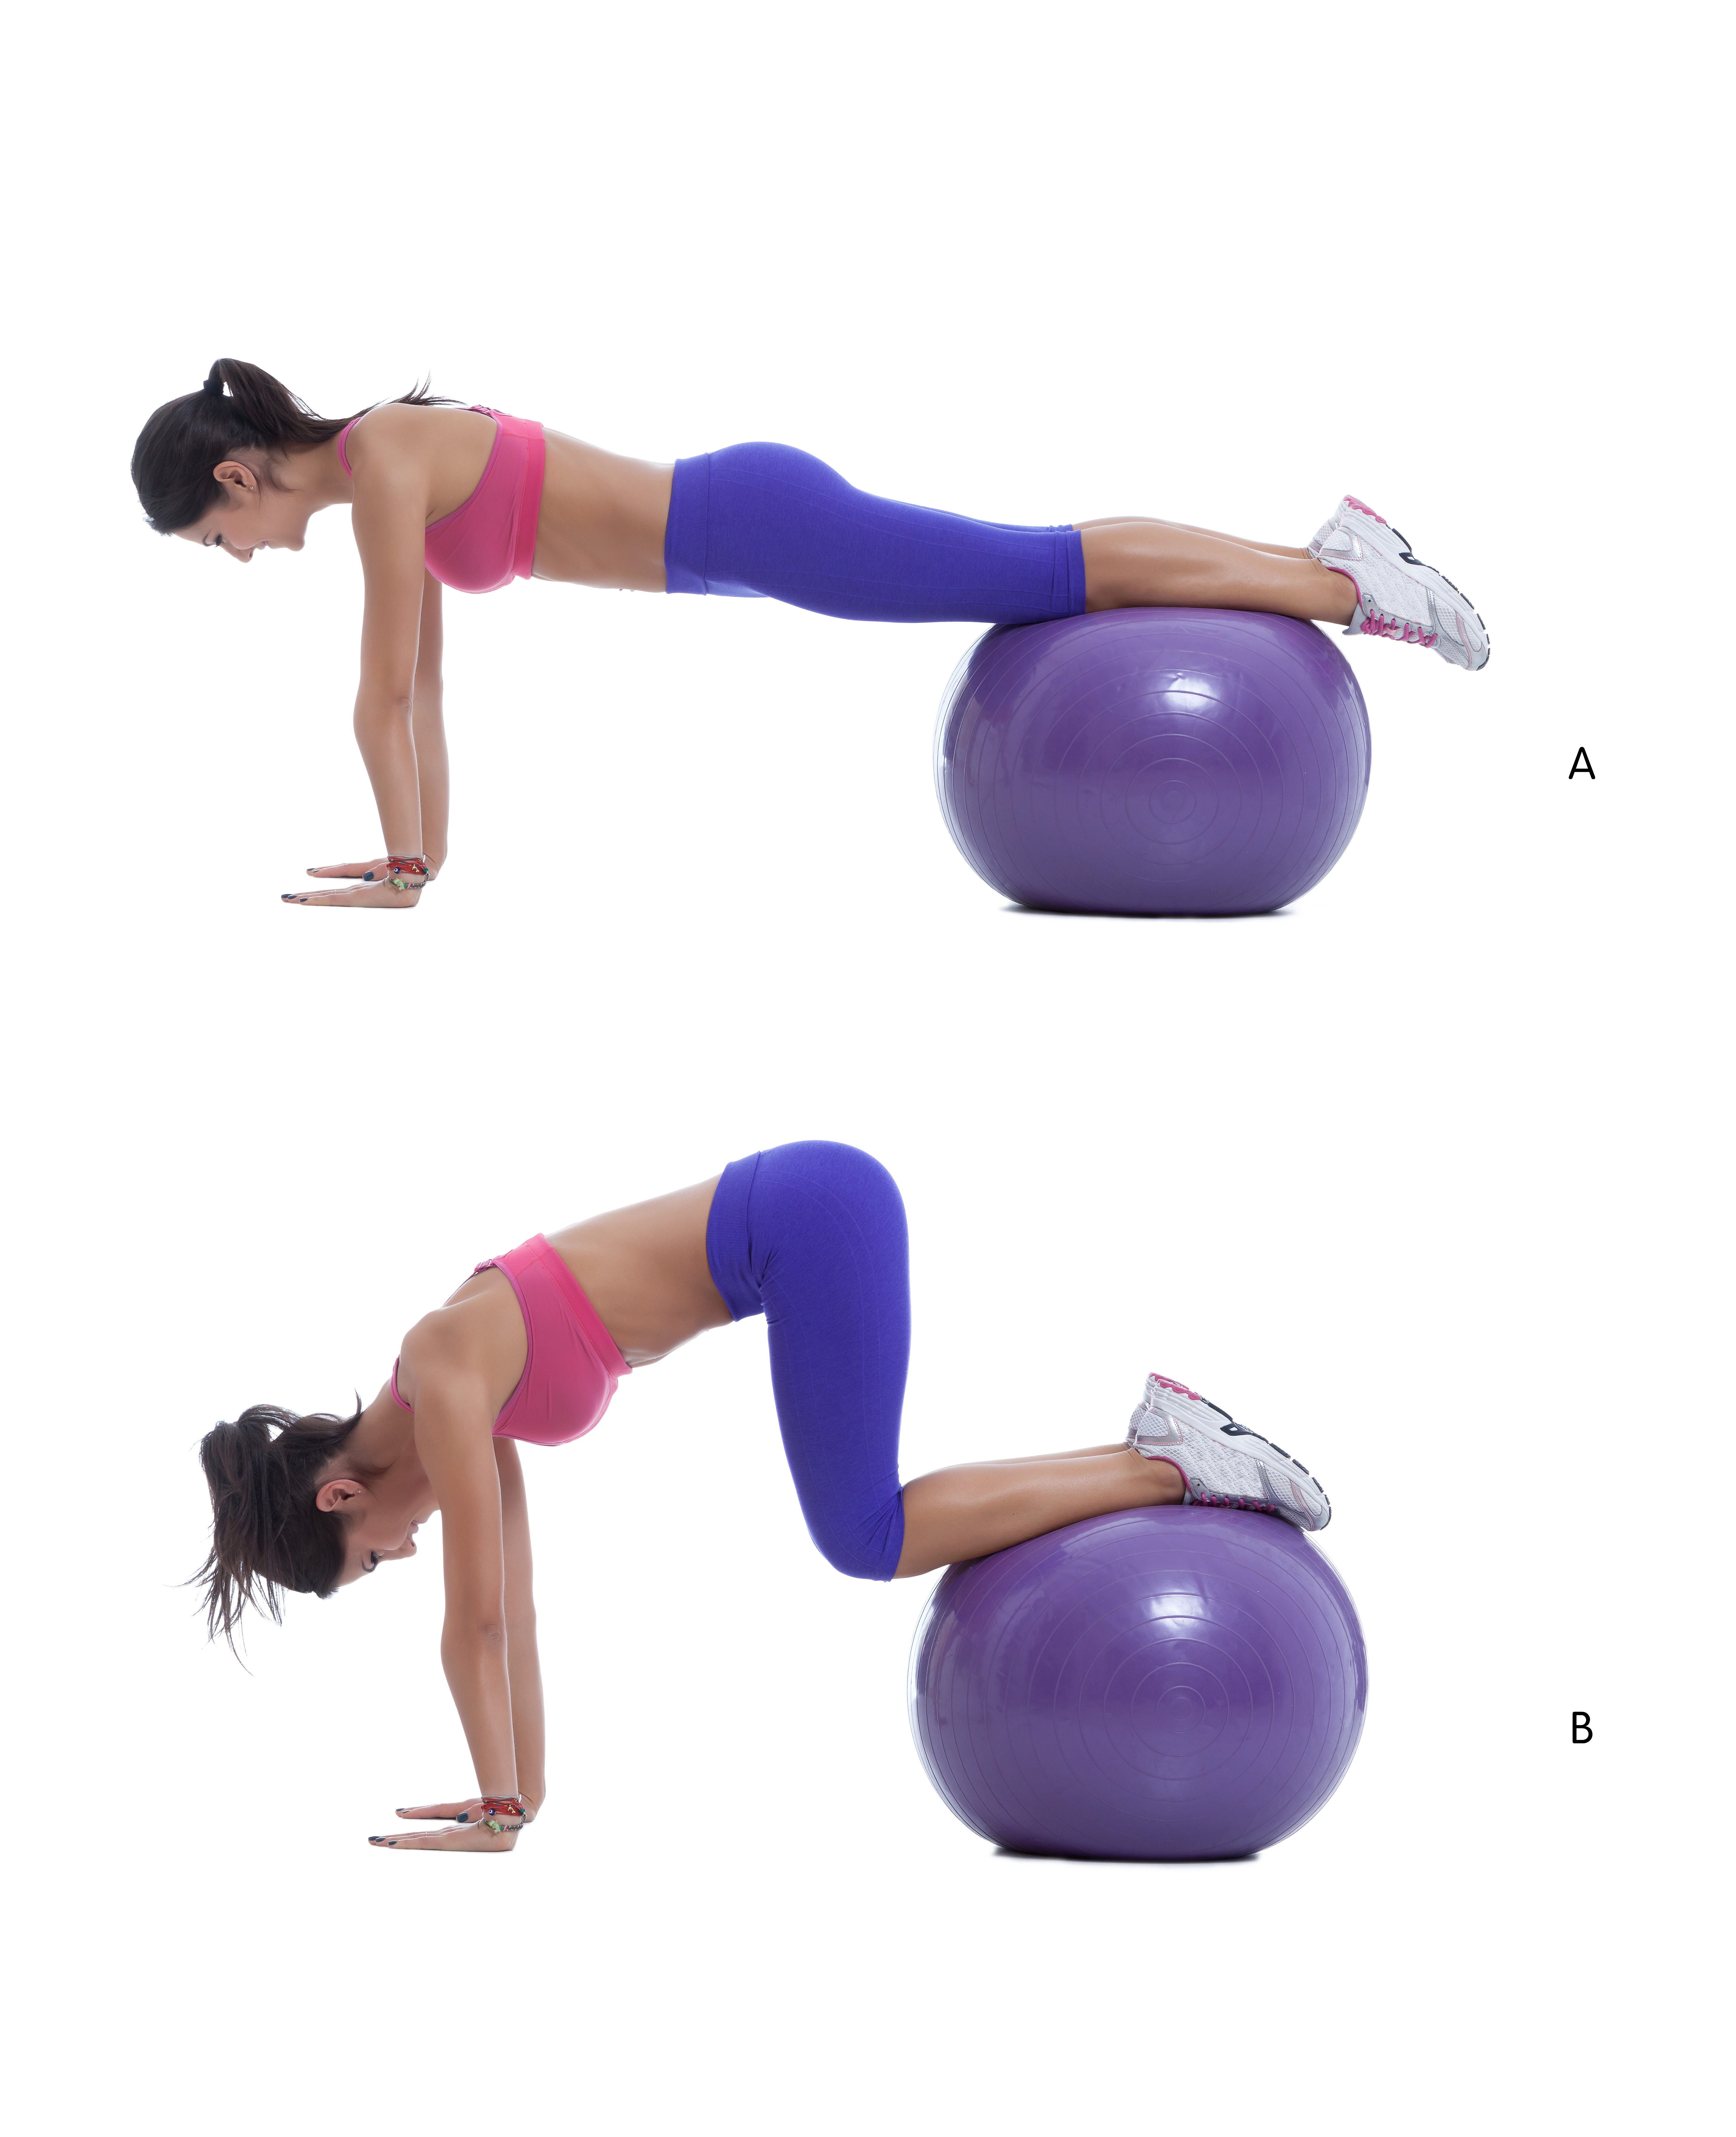 Step by step instructions for abs: Start in a push-up position with your feet up on the ball. Make sure that you engage your core and raise your hips so your back is flat before you begin. (A) Keep your back flat and try not to raise you hips as you draw